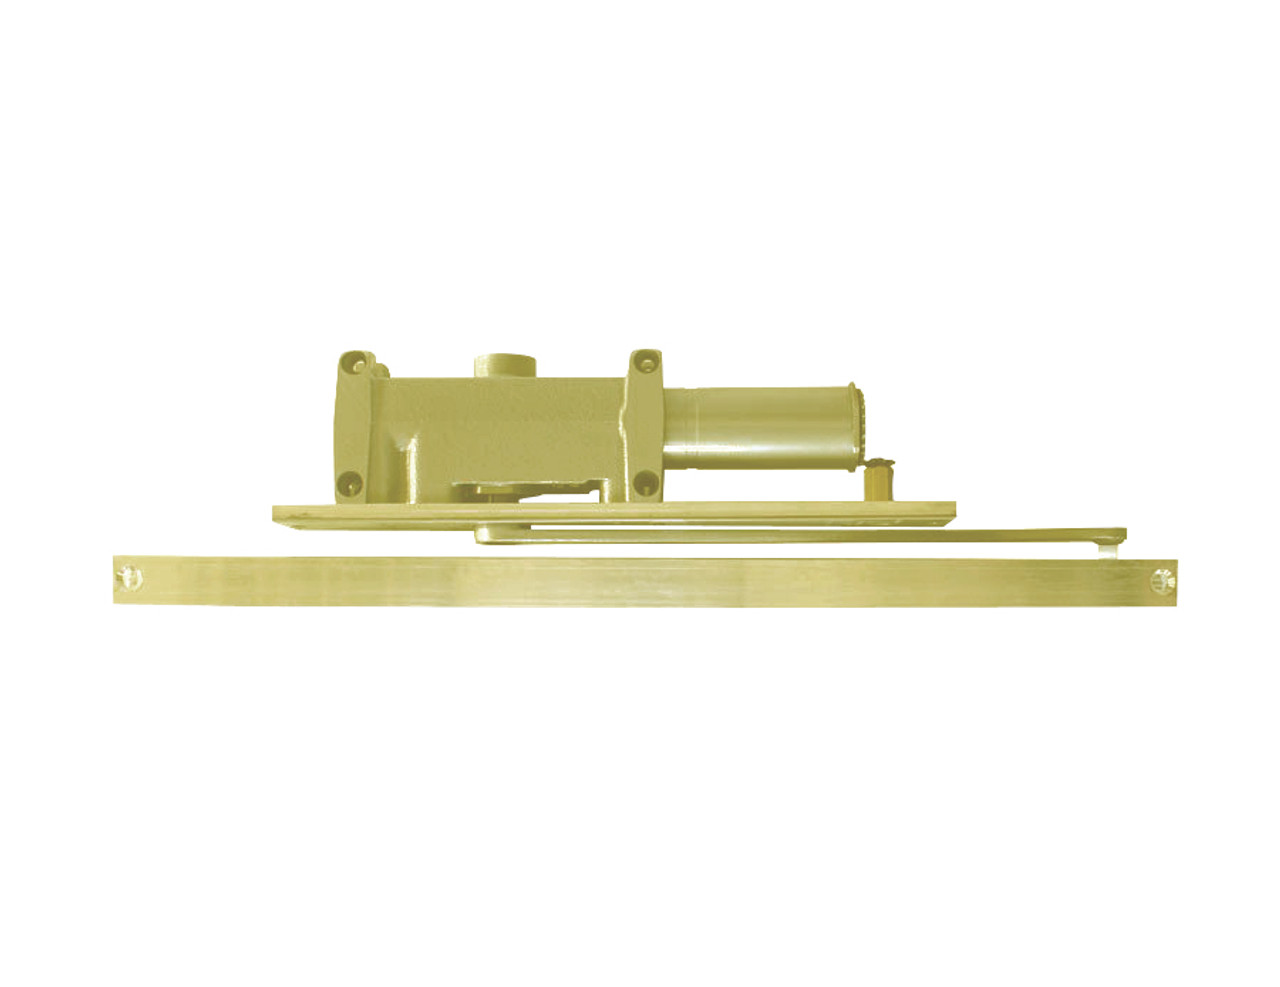 5013-H-LH-US4 LCN Door Closer with Hold Open Arm in Satin Brass Finish